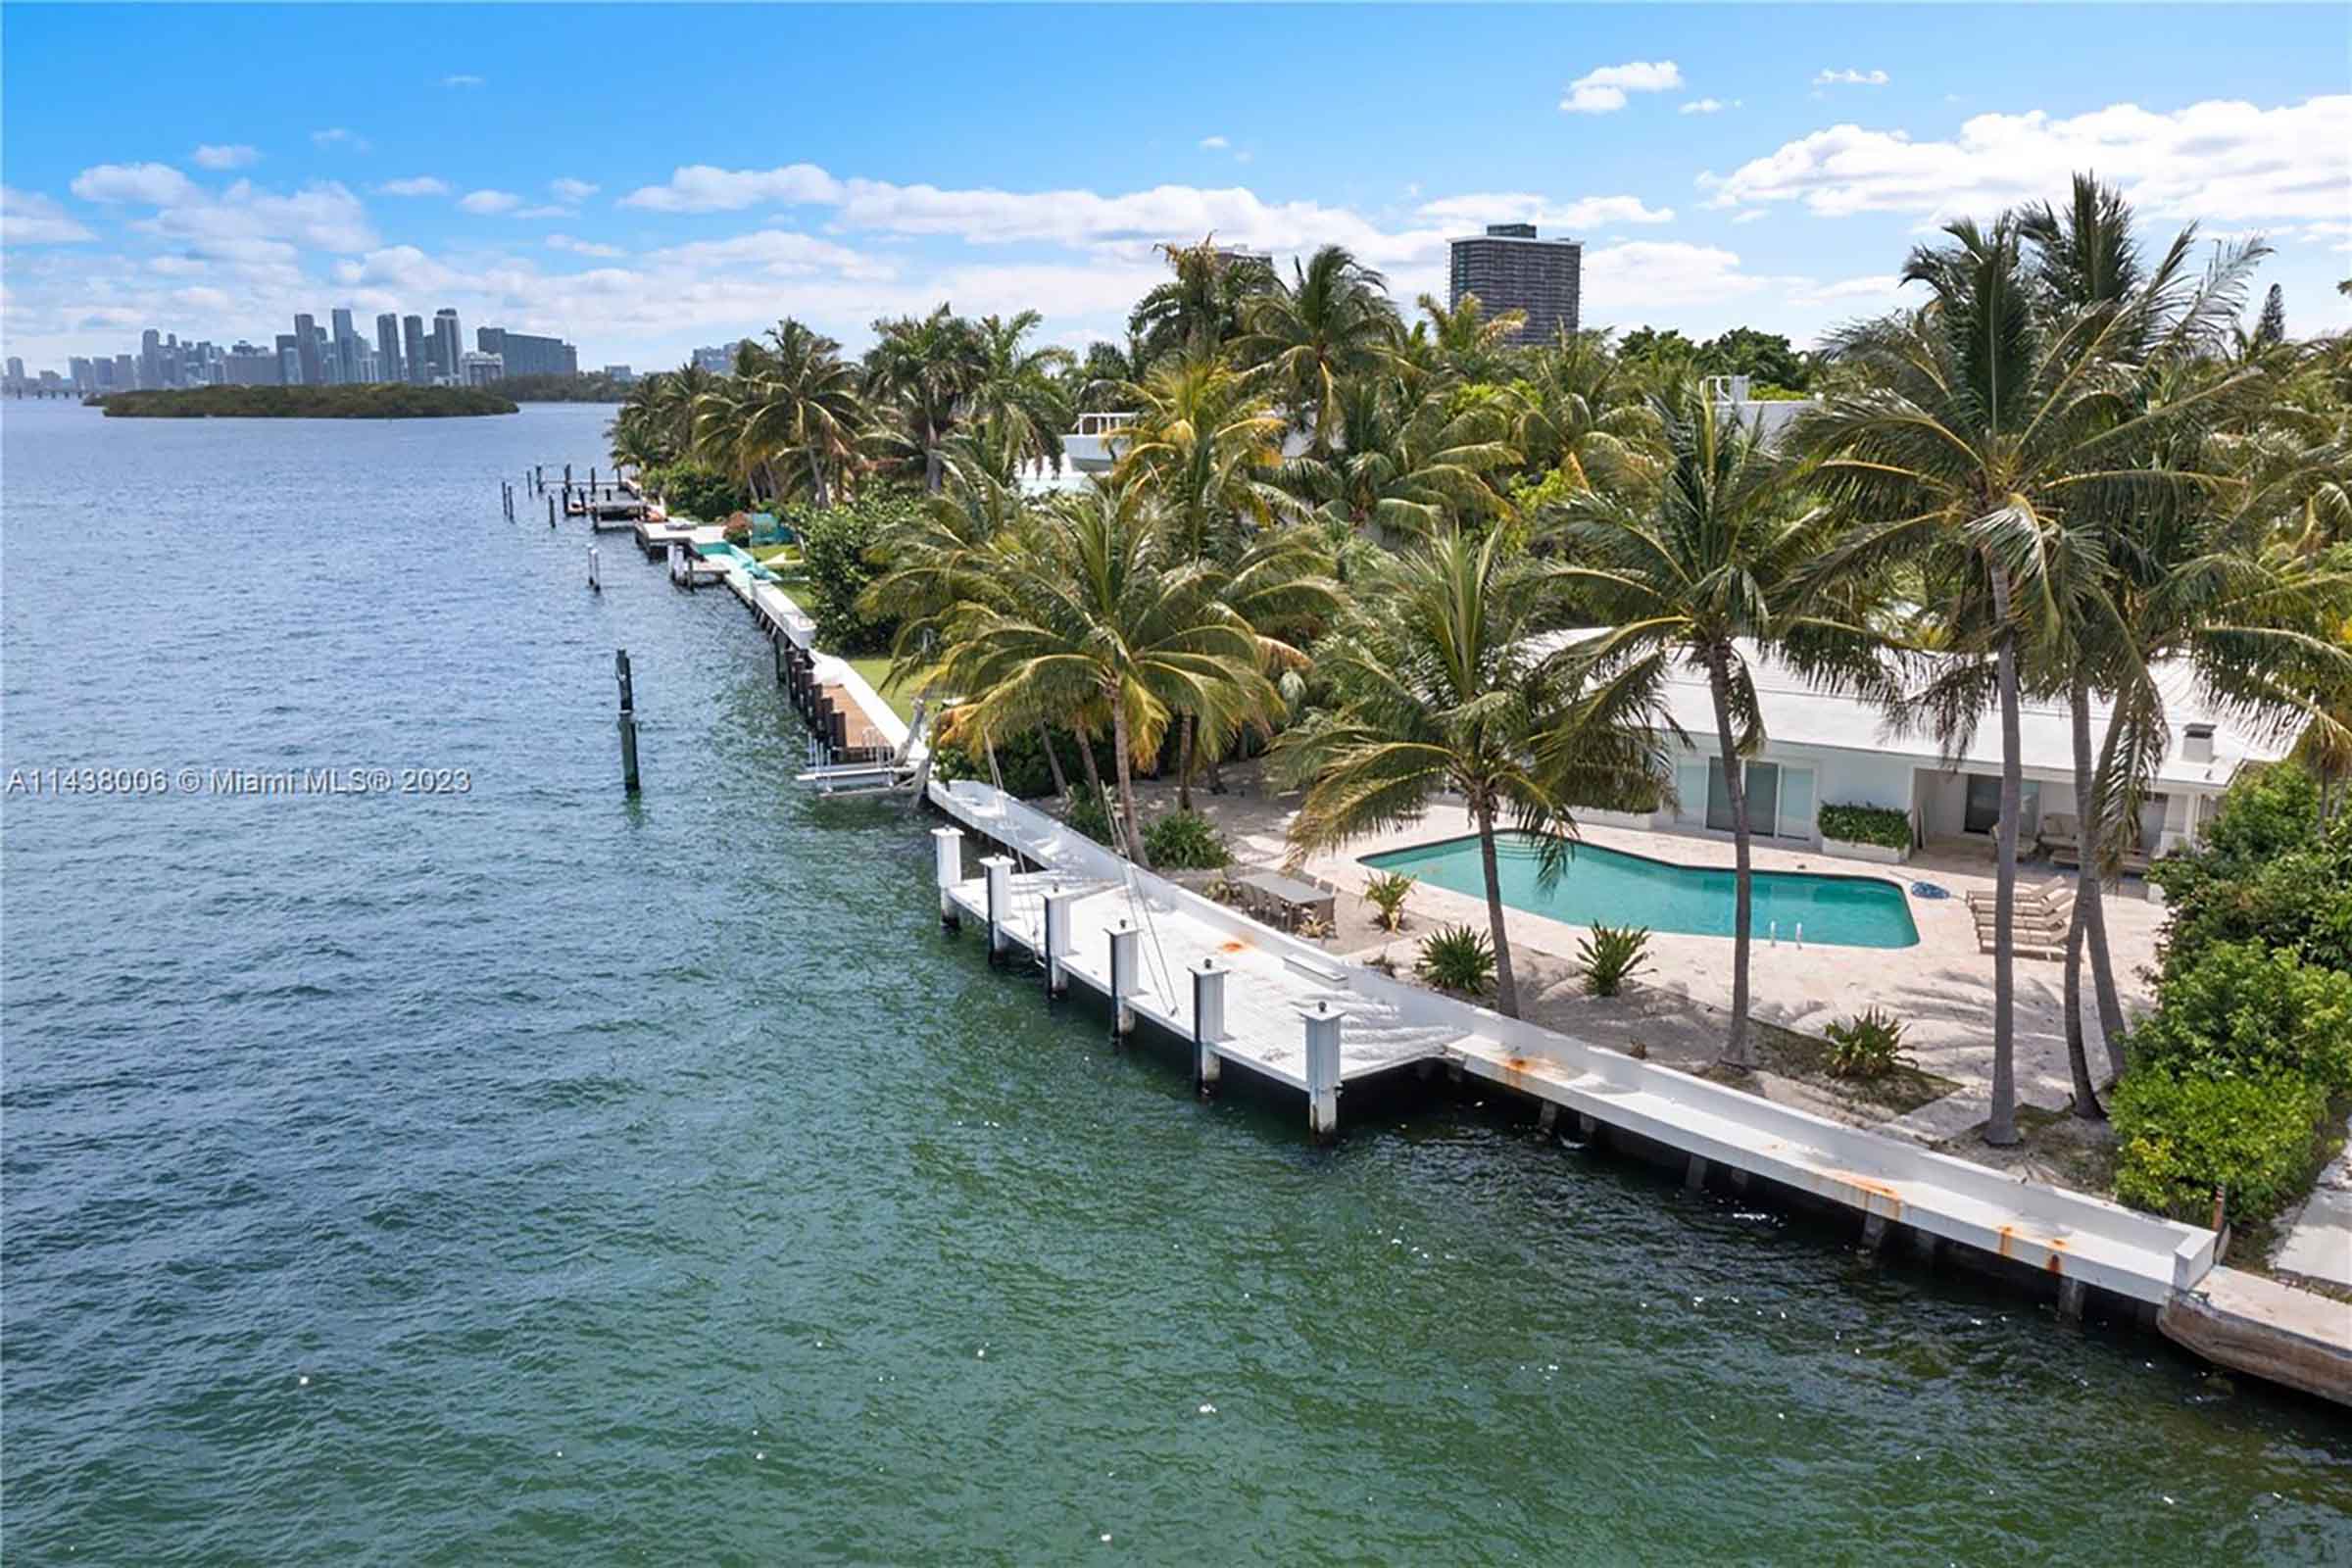 Dr. Lenny Hochstein Belle Meade Island Miami Home Waterfront